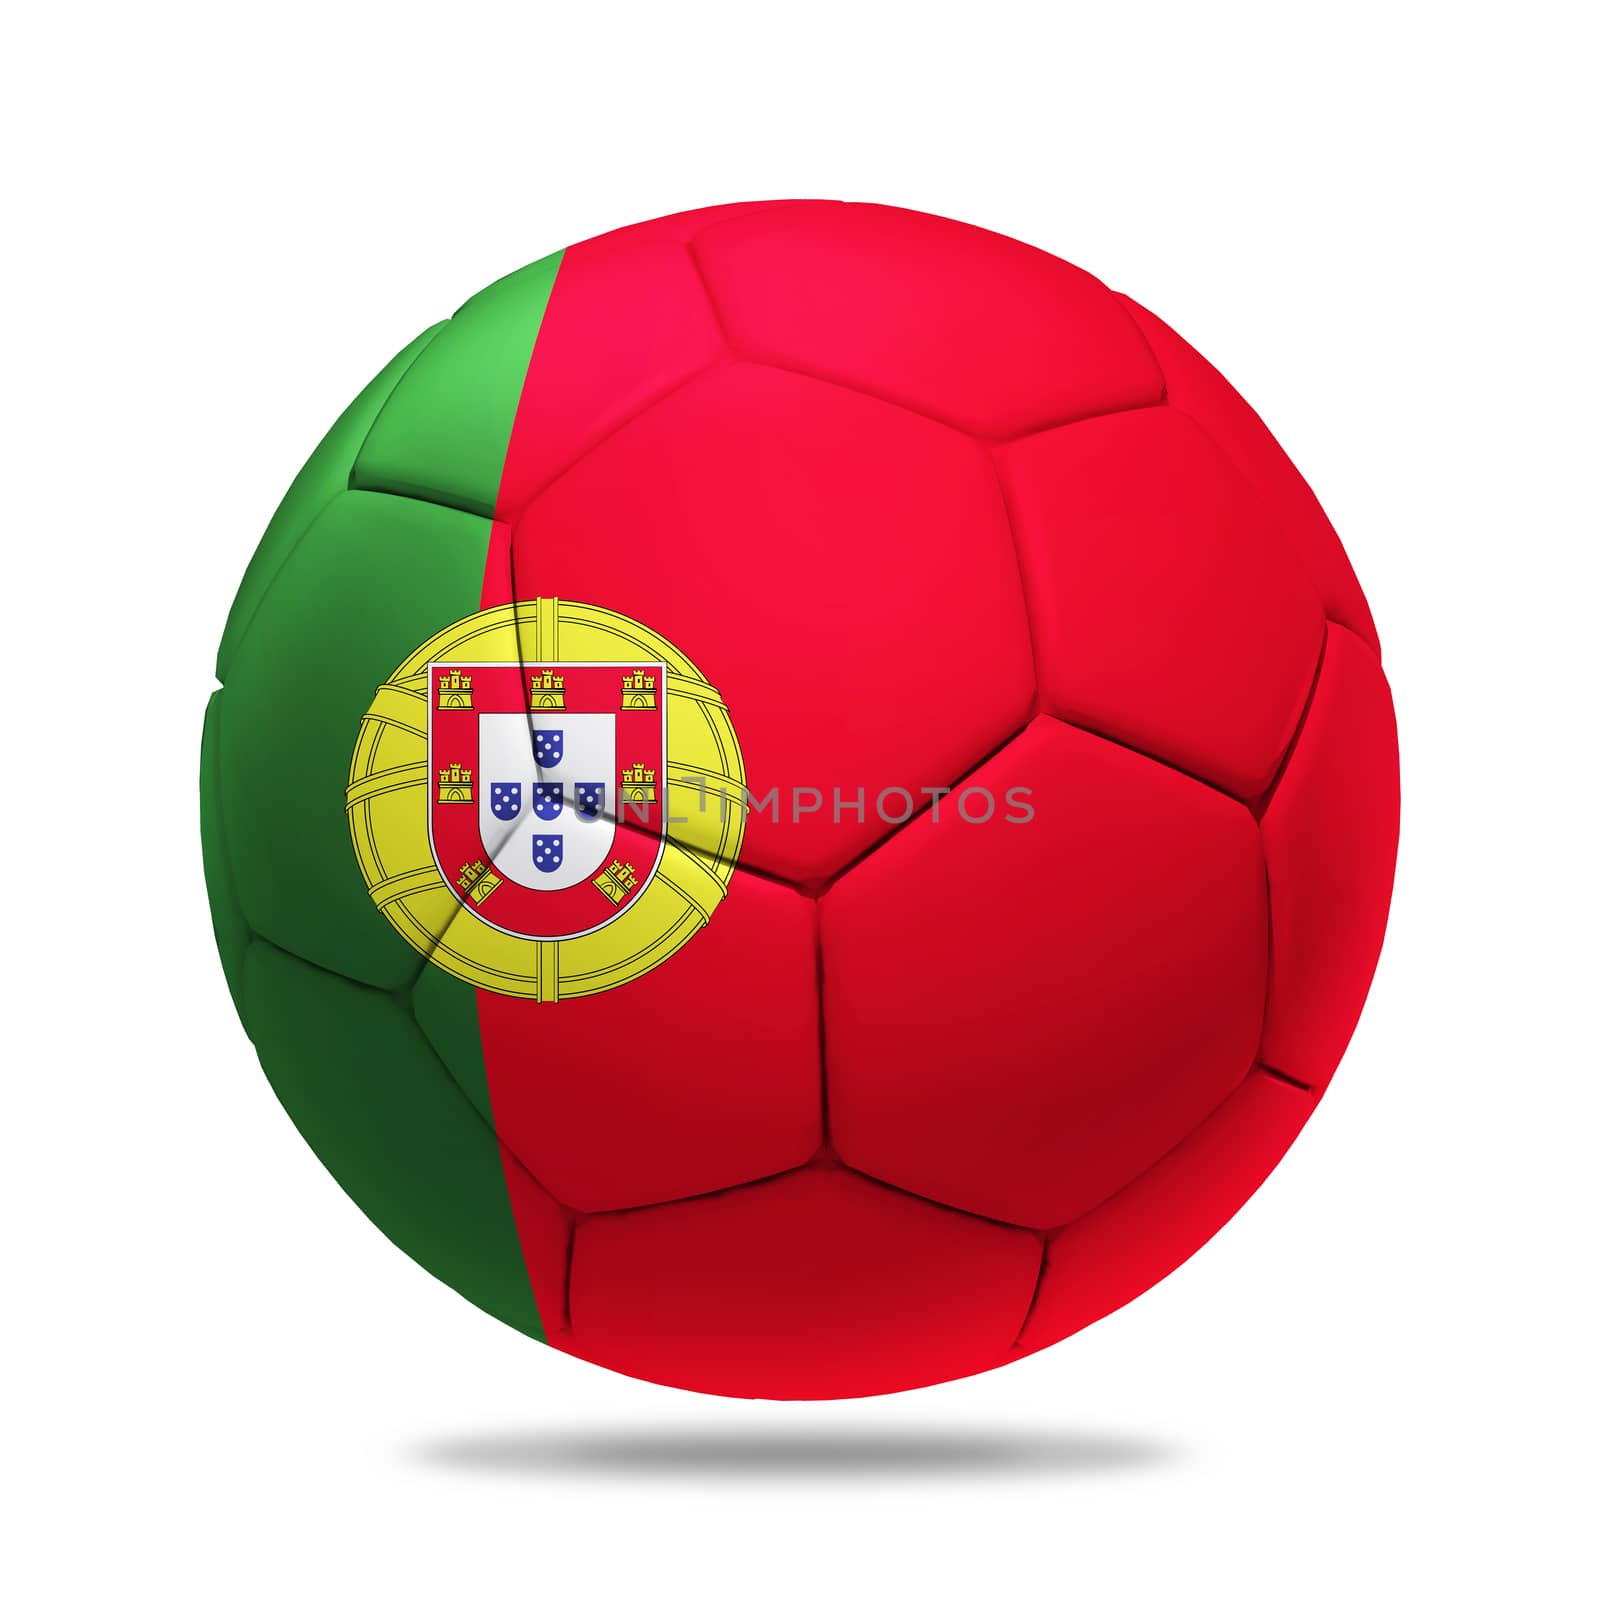 3D soccer ball with Portugal team flag, isolated on white